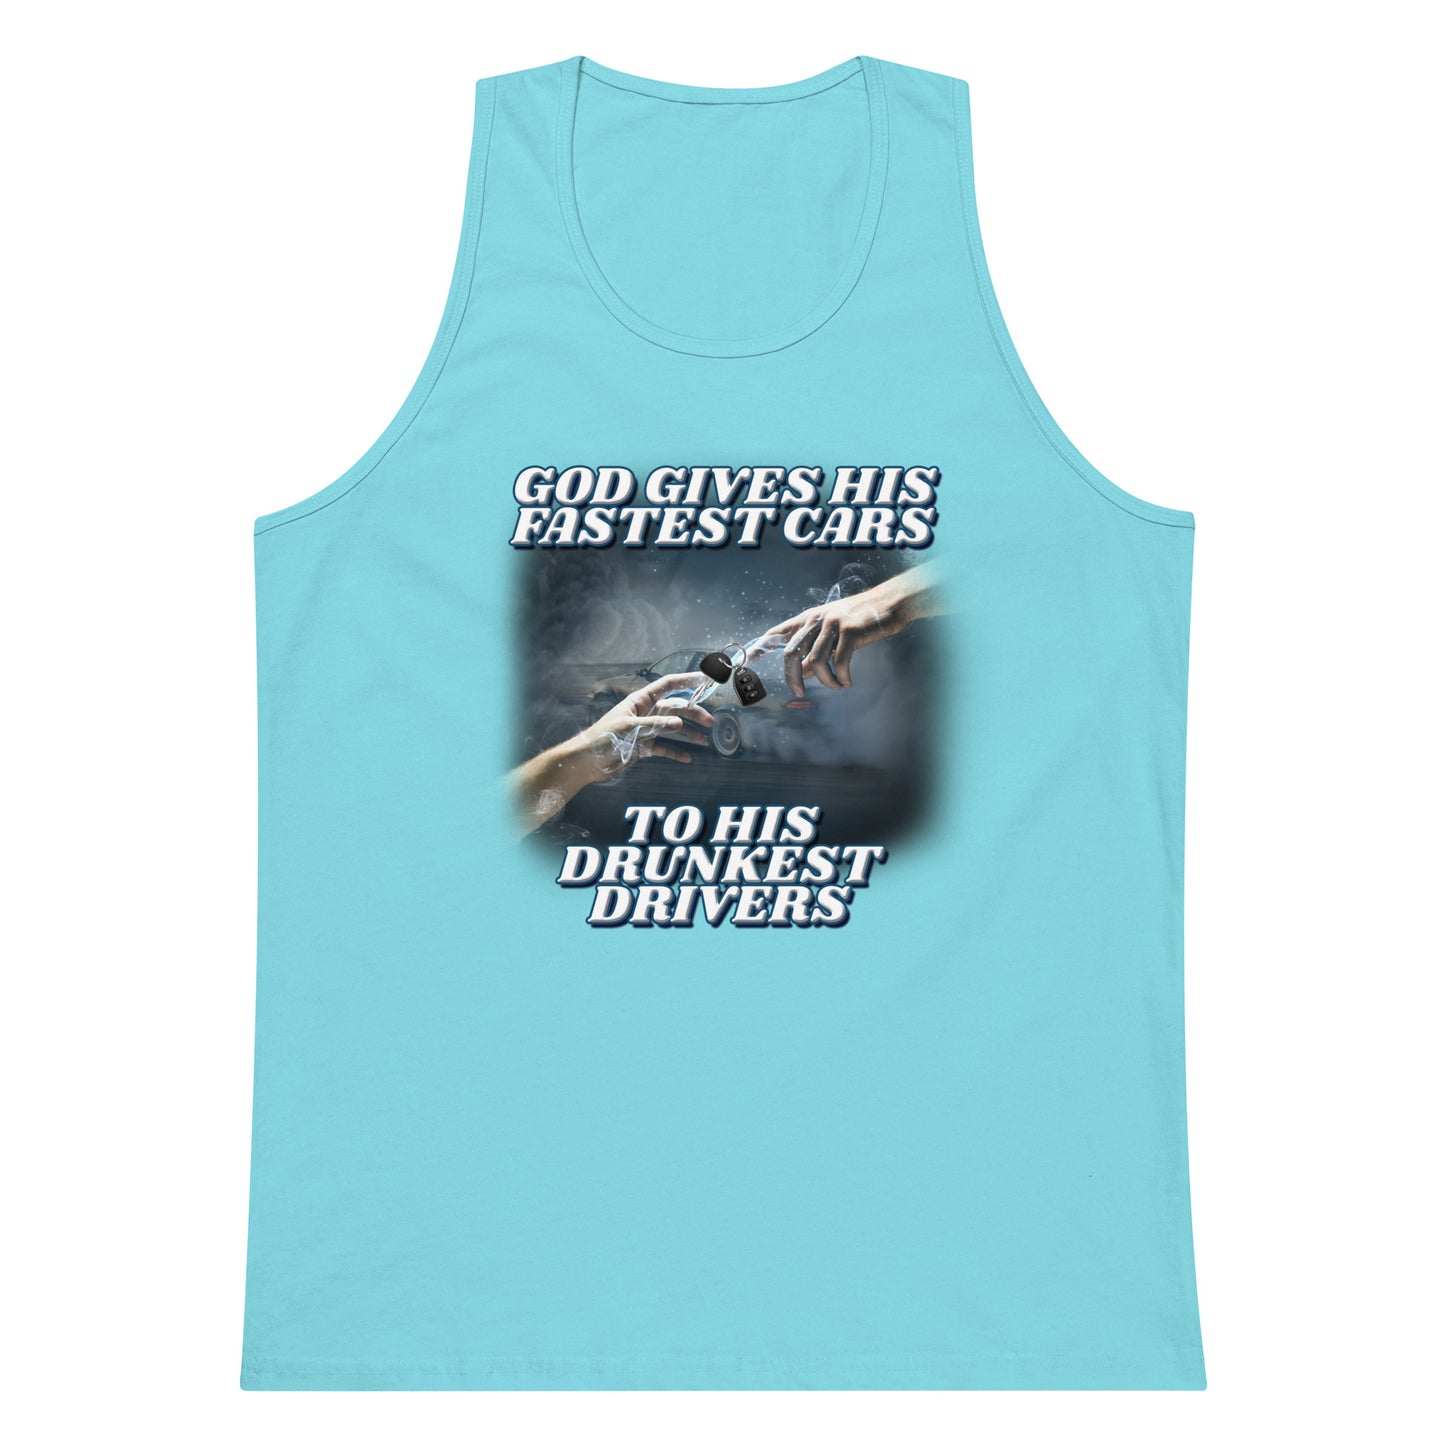 God Gives His Fastest Cars to His Drunkest Drivers tank top